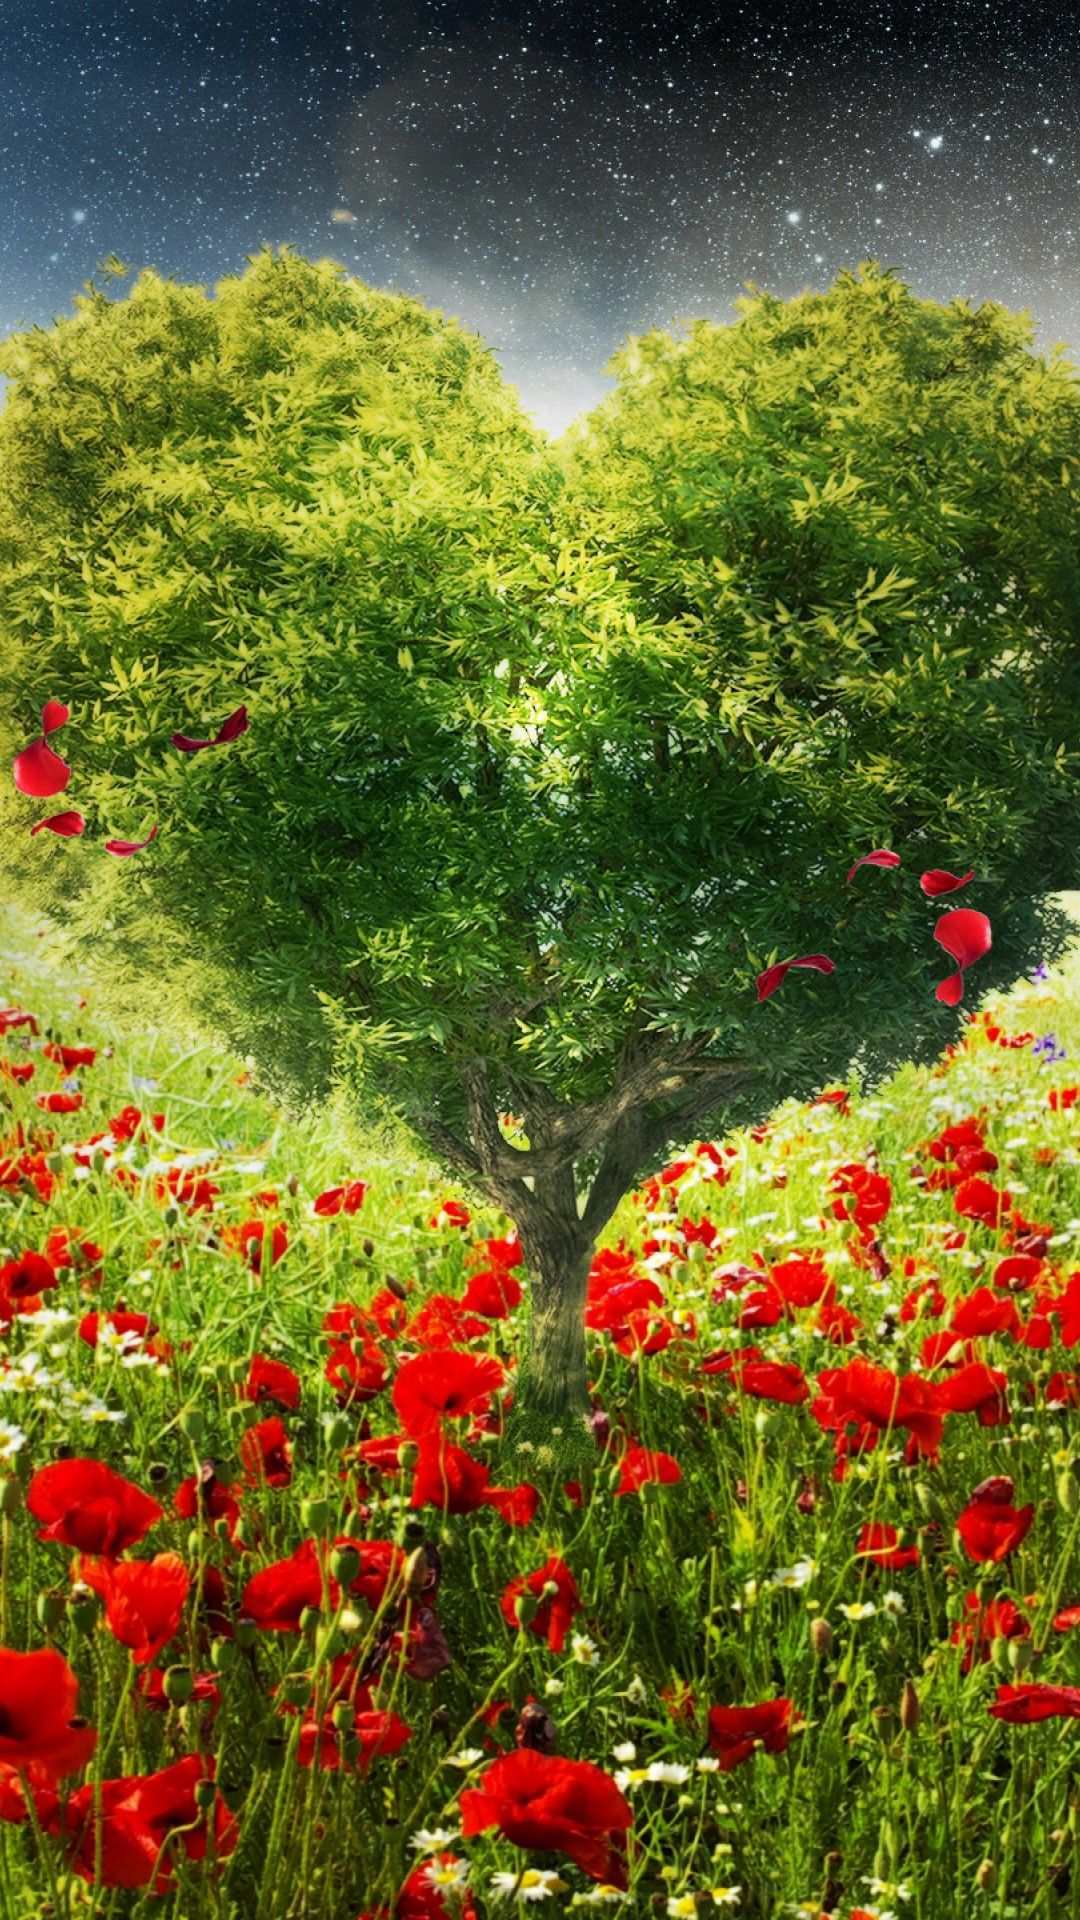 Free Green Heart Tree Poppies HD Wallpaper for Desktop and Mobiles iPhone 6 / 6S Plus